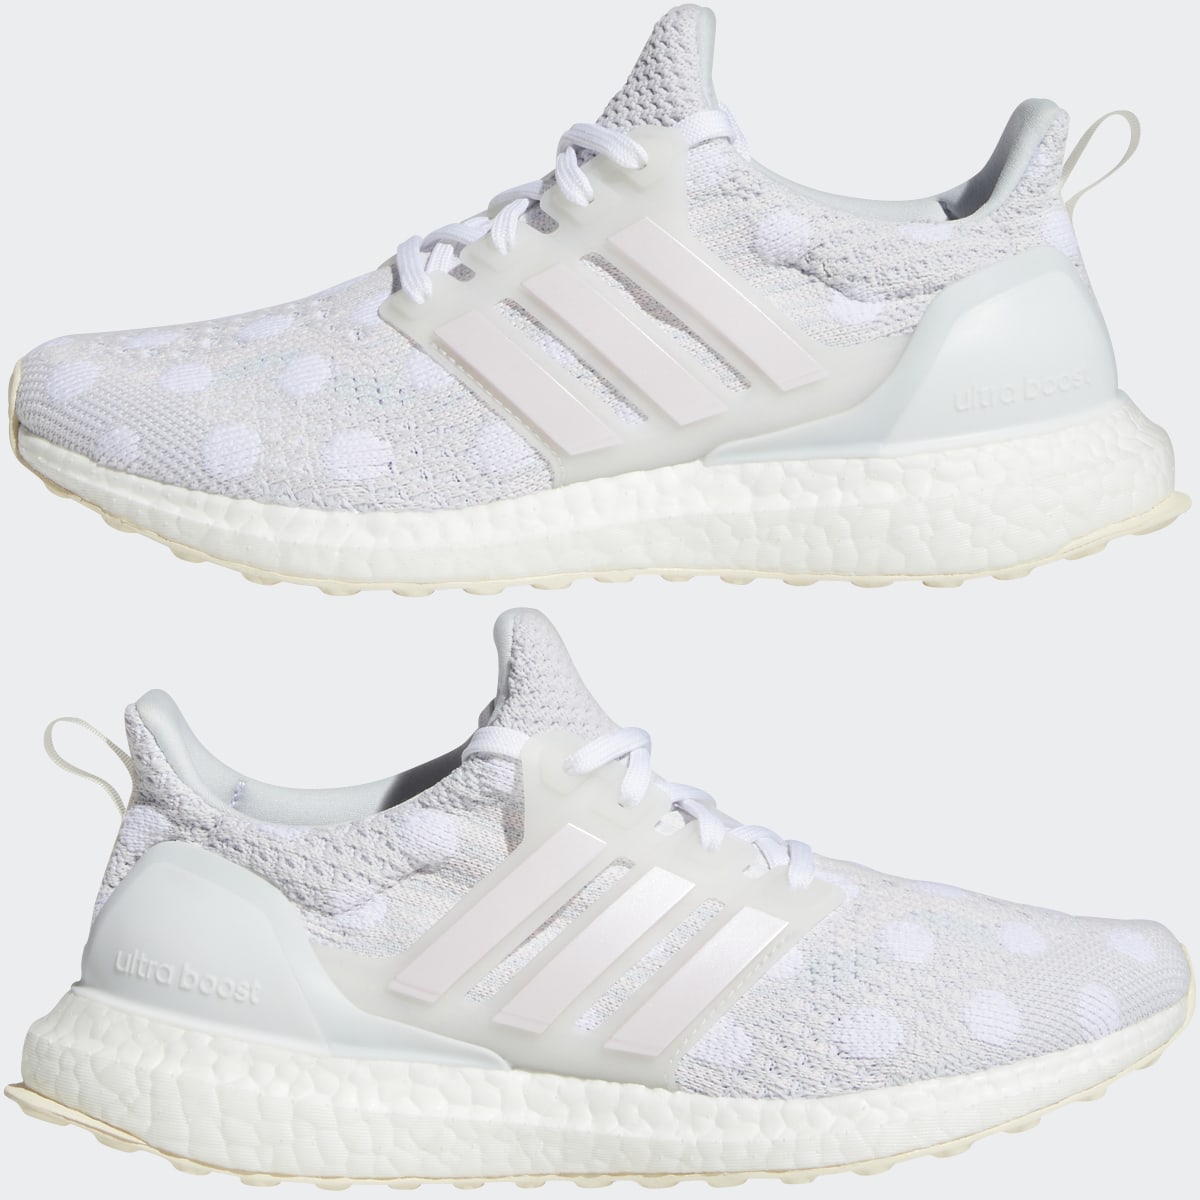 Adidas Ultraboost 5 DNA Shoes. 8